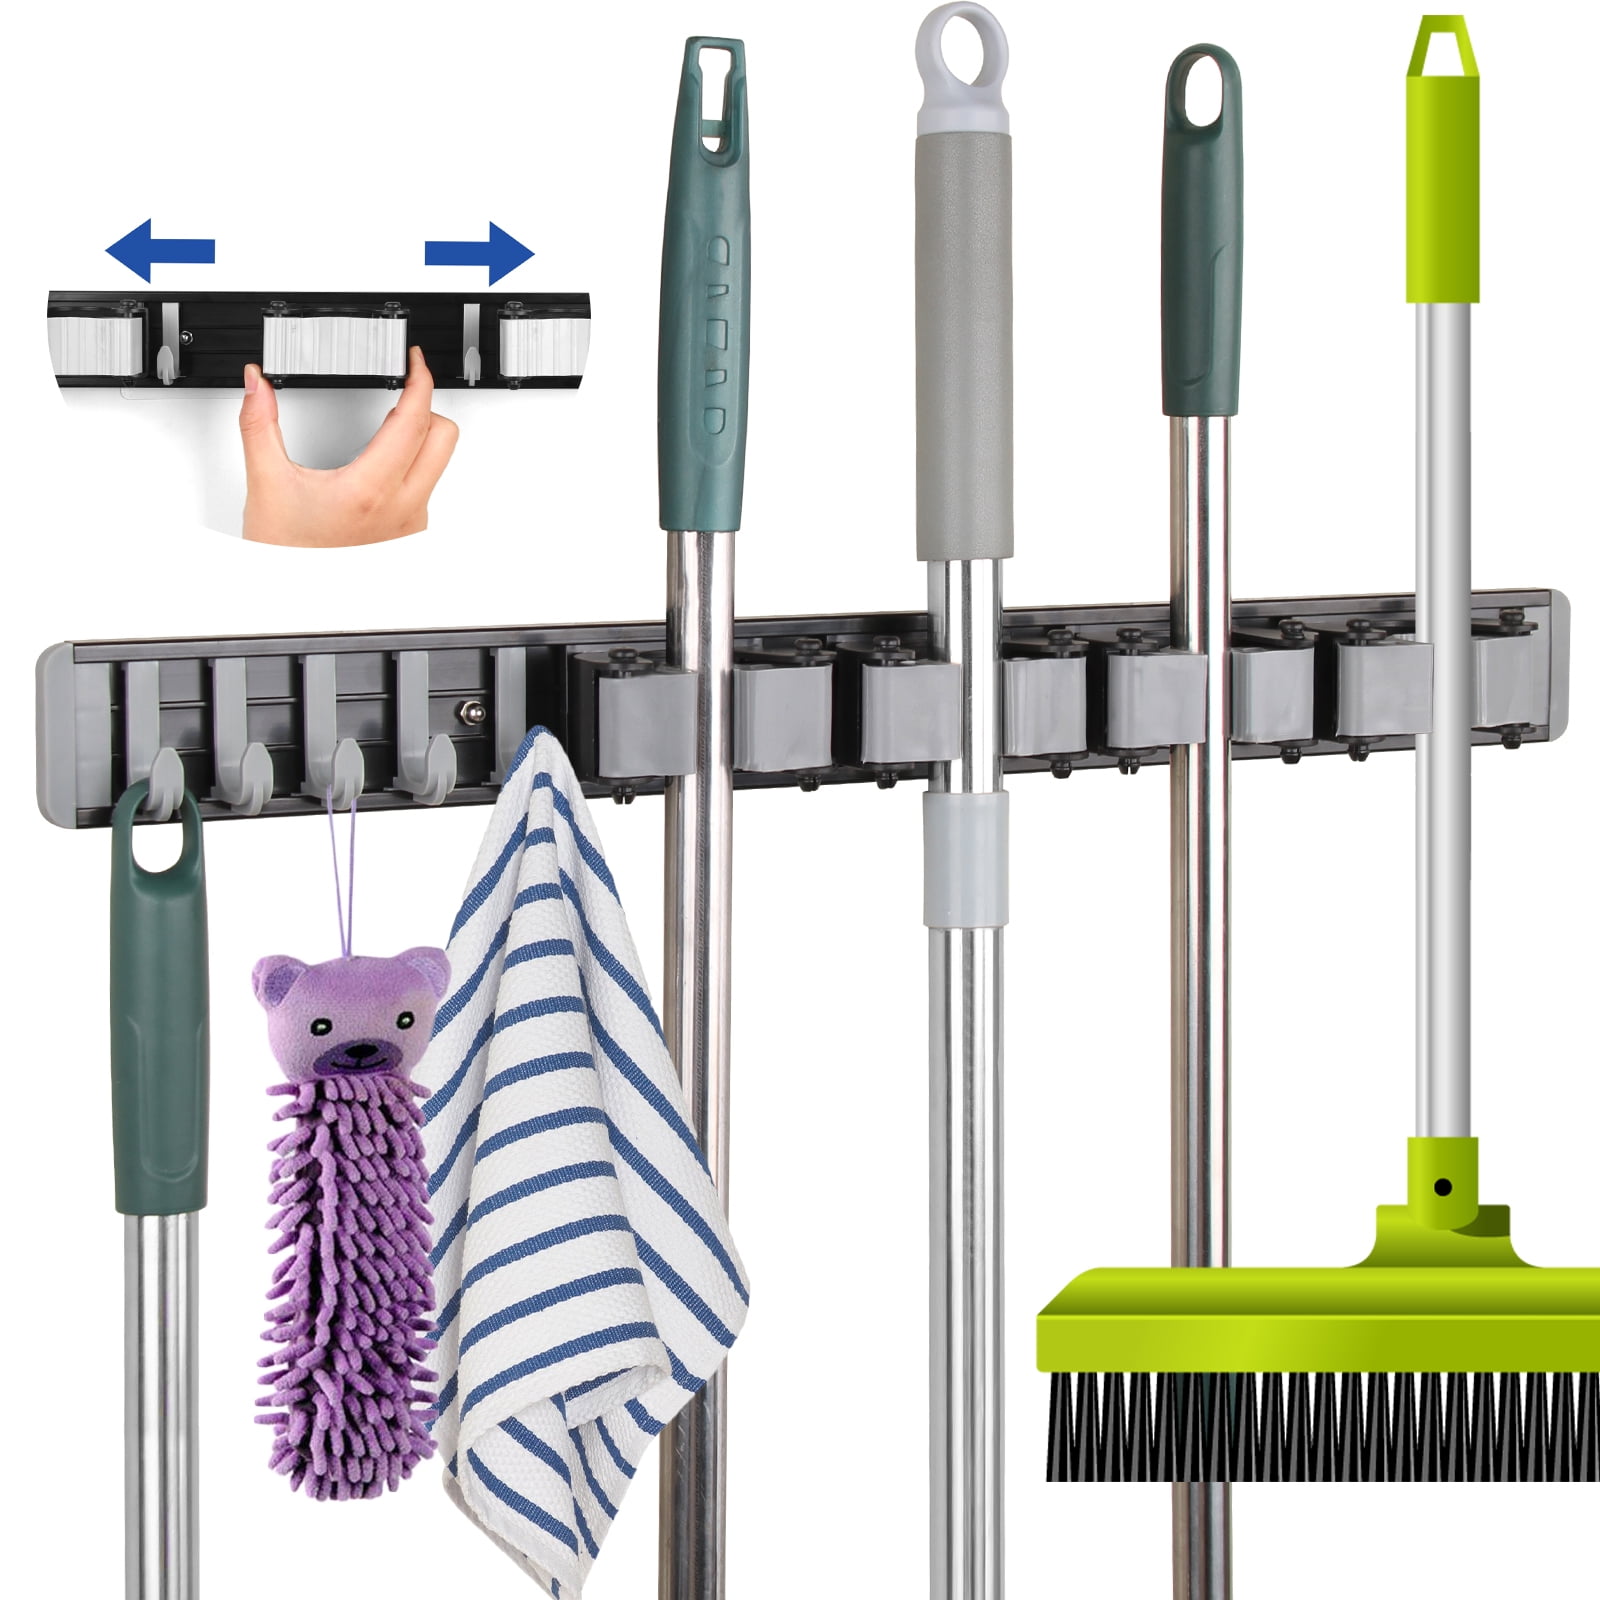  QTJH broom and mop holder wall mounted Storage